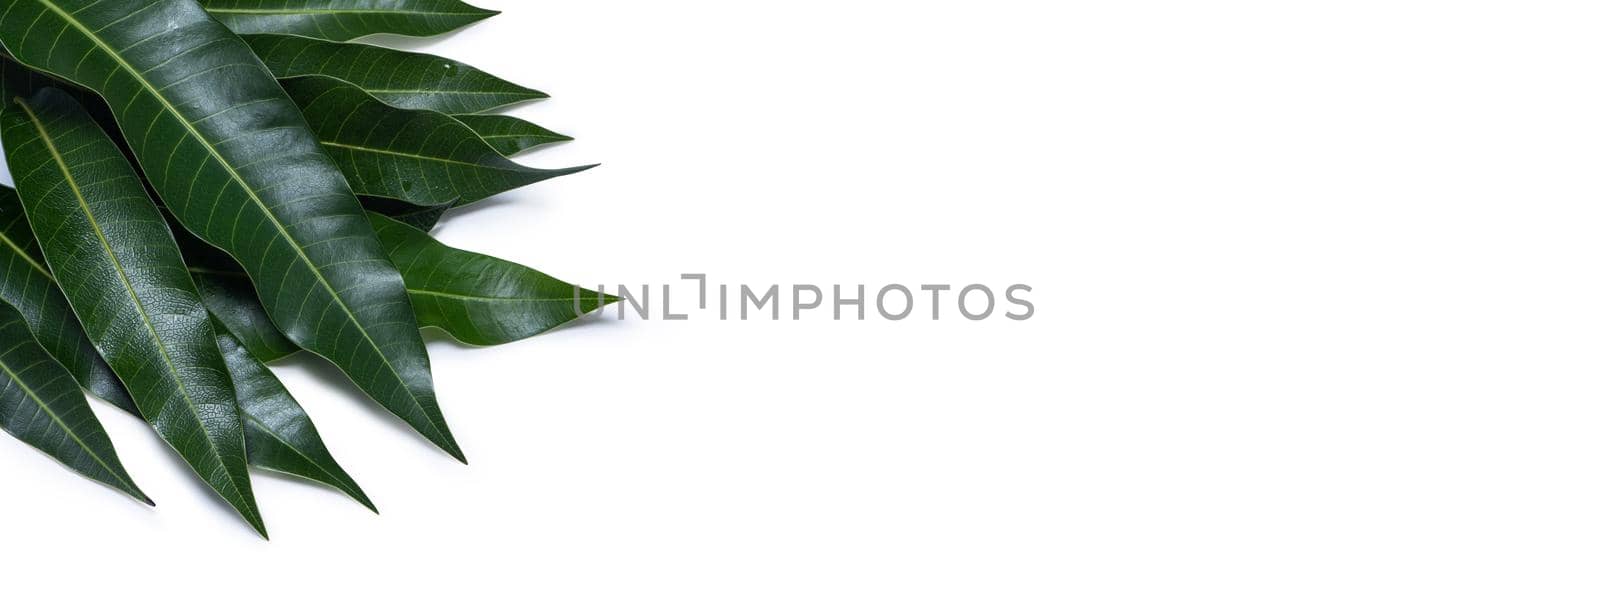 Green fresh mango leaves isolated on white background, beautiful vein texture in detail. Clipping path, cut out, close up, macro. Tropical concept.